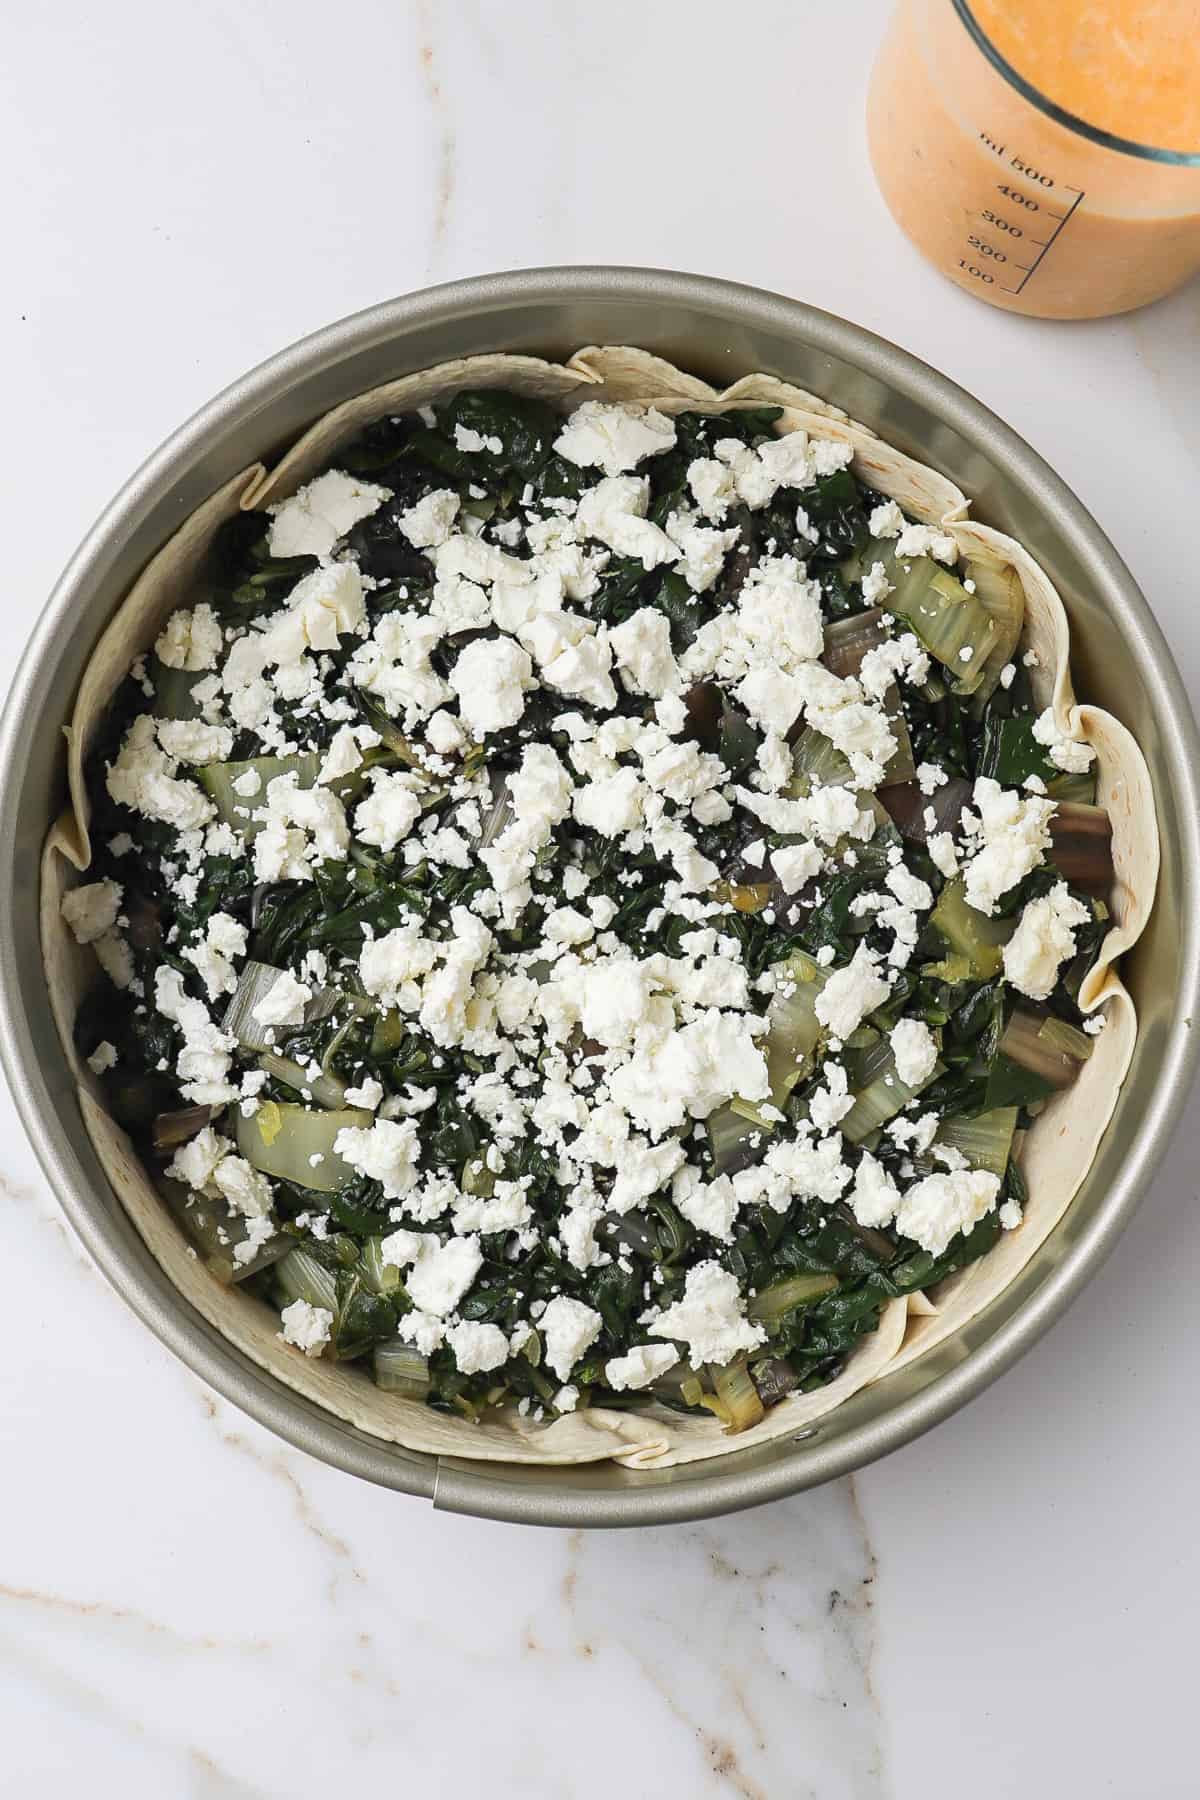 Cooked silverbeet and feta in tortilla curst before egg mixture poured on top.